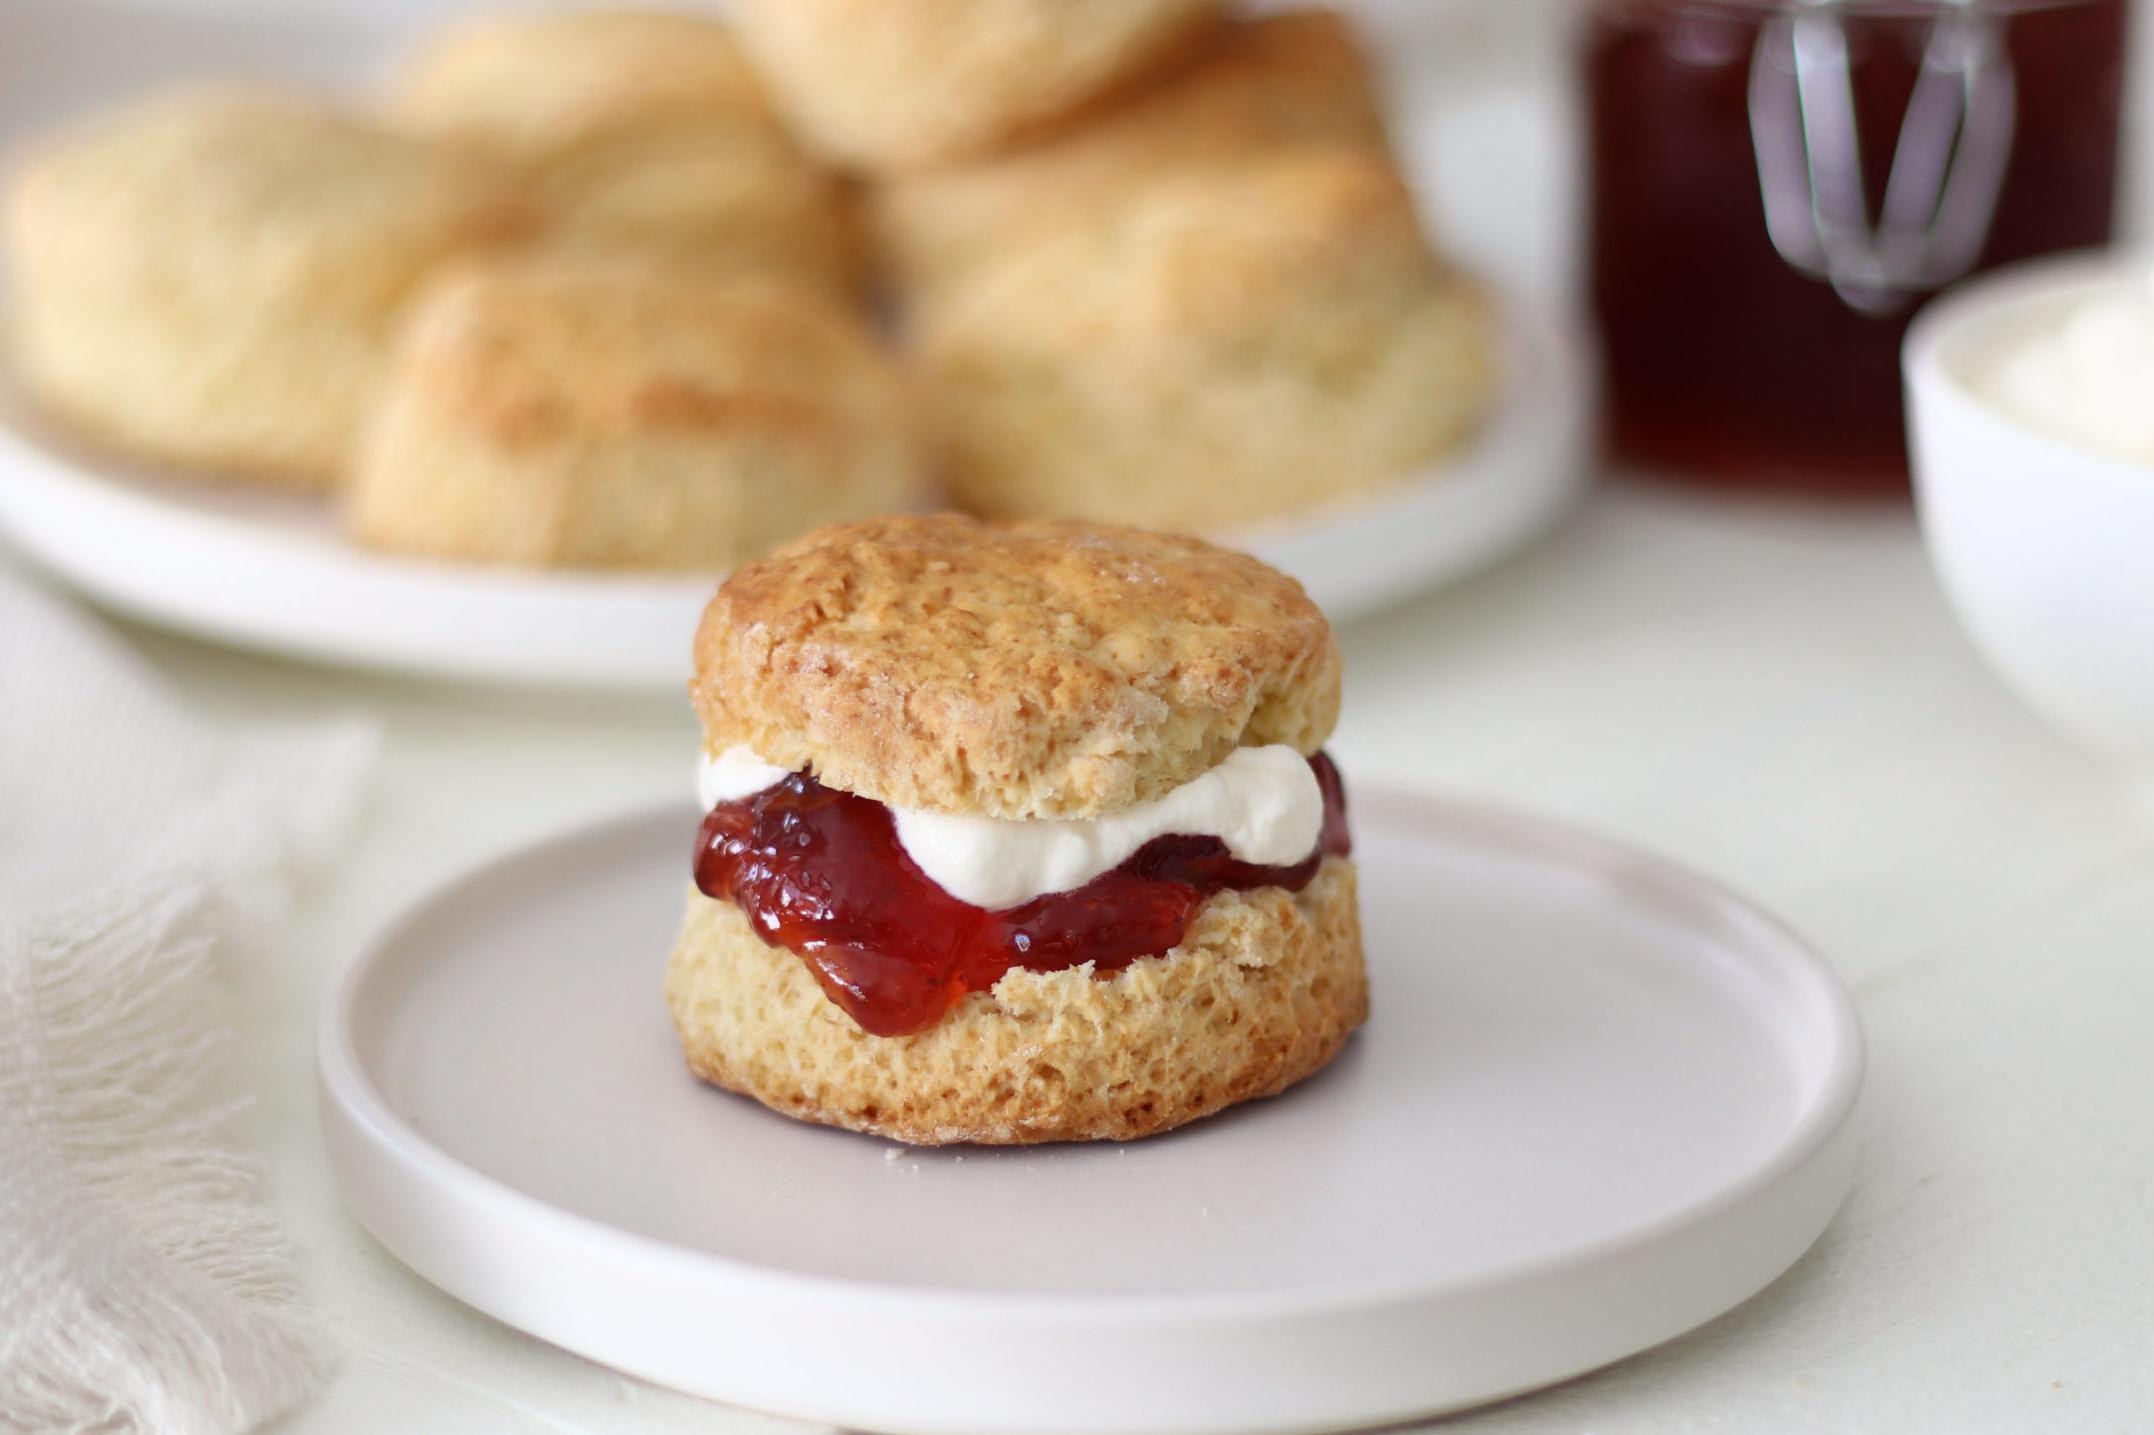  These scones are best served with clotted cream and jam for a classic British experience.